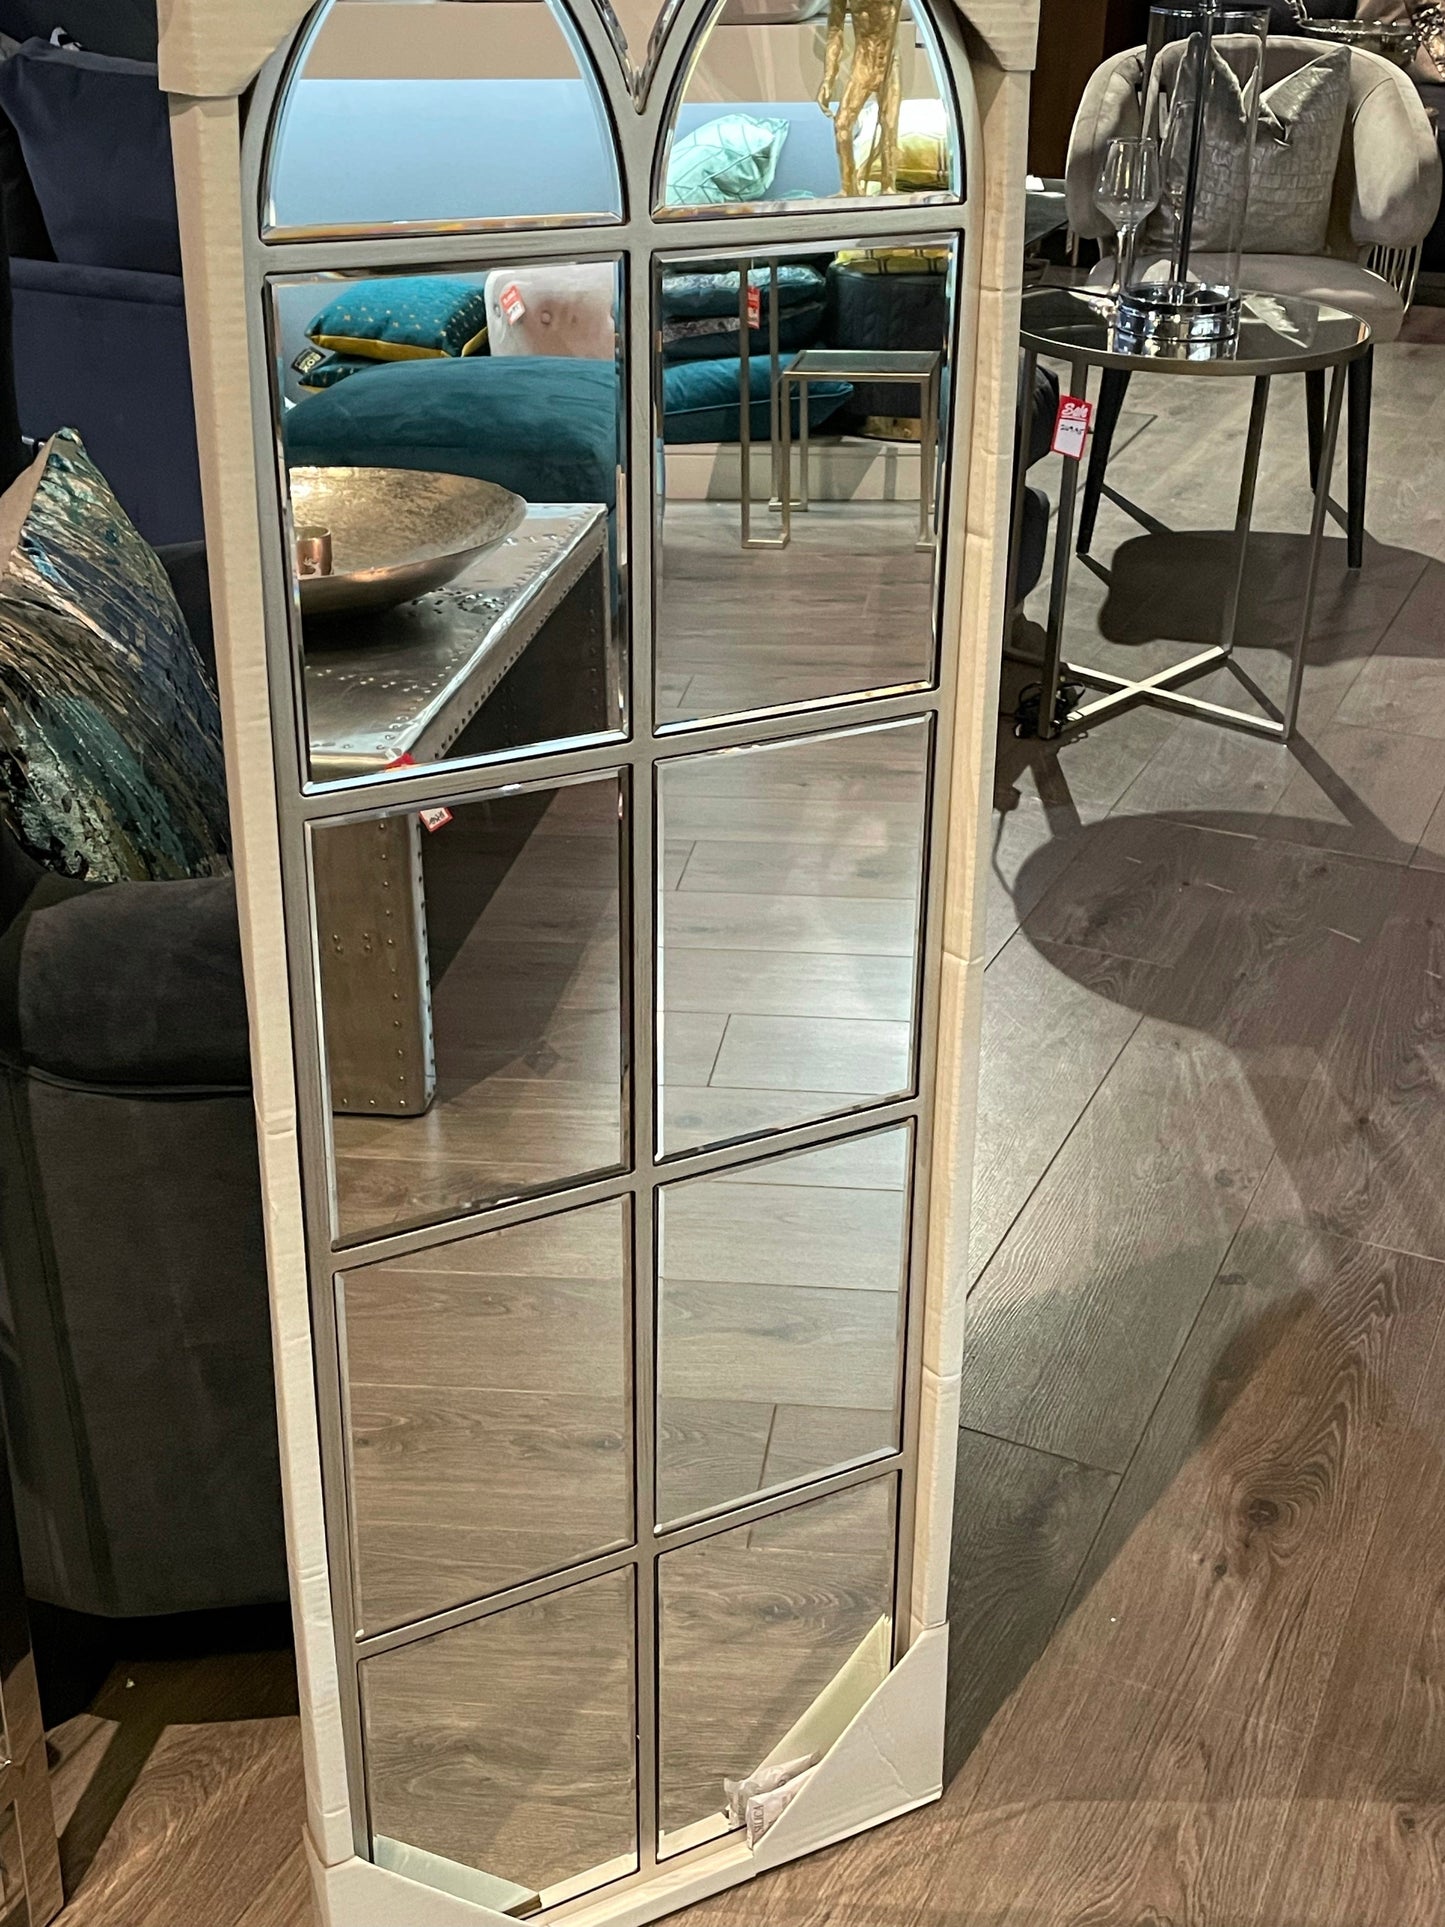 Paul large tall window mirror in champagne half price unwrapped on display